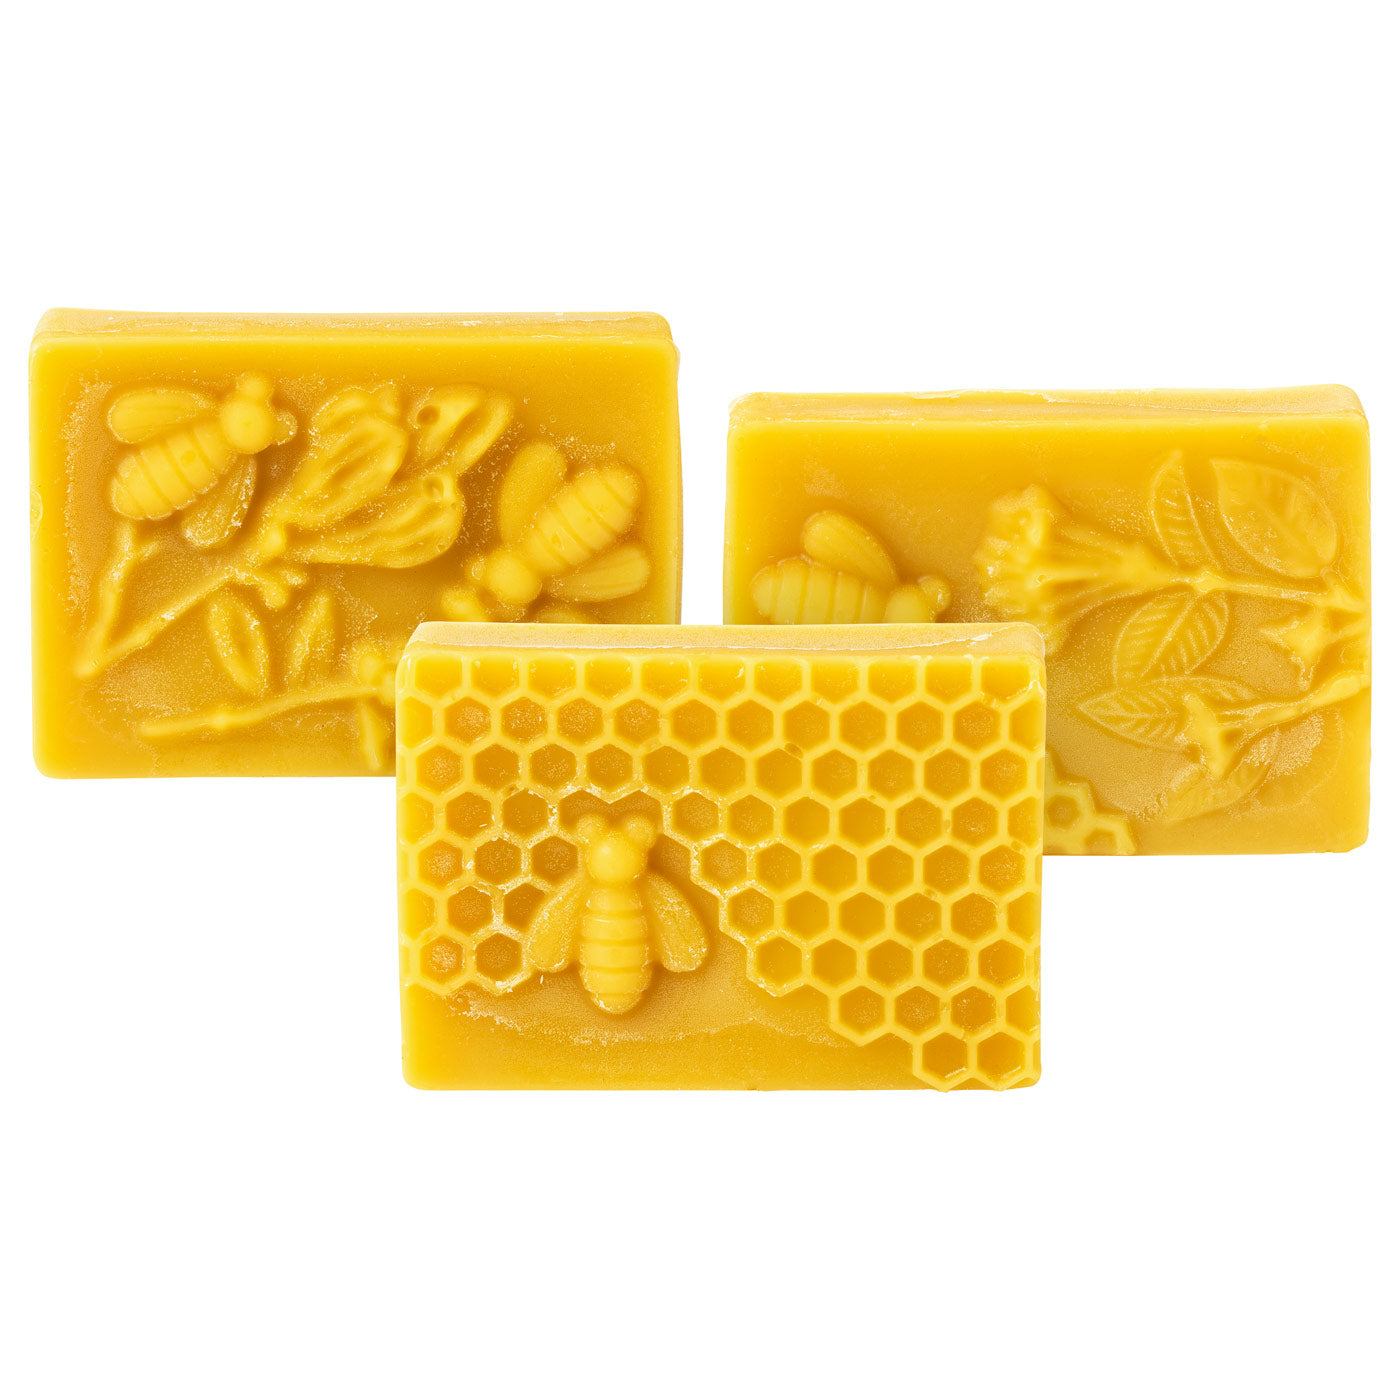 Beeswax 5 oz Filtered 100% Pure Yellow Premium Bees Wax Cosmetic Grade A 5  bars - Tony's Restaurant in Alton, IL